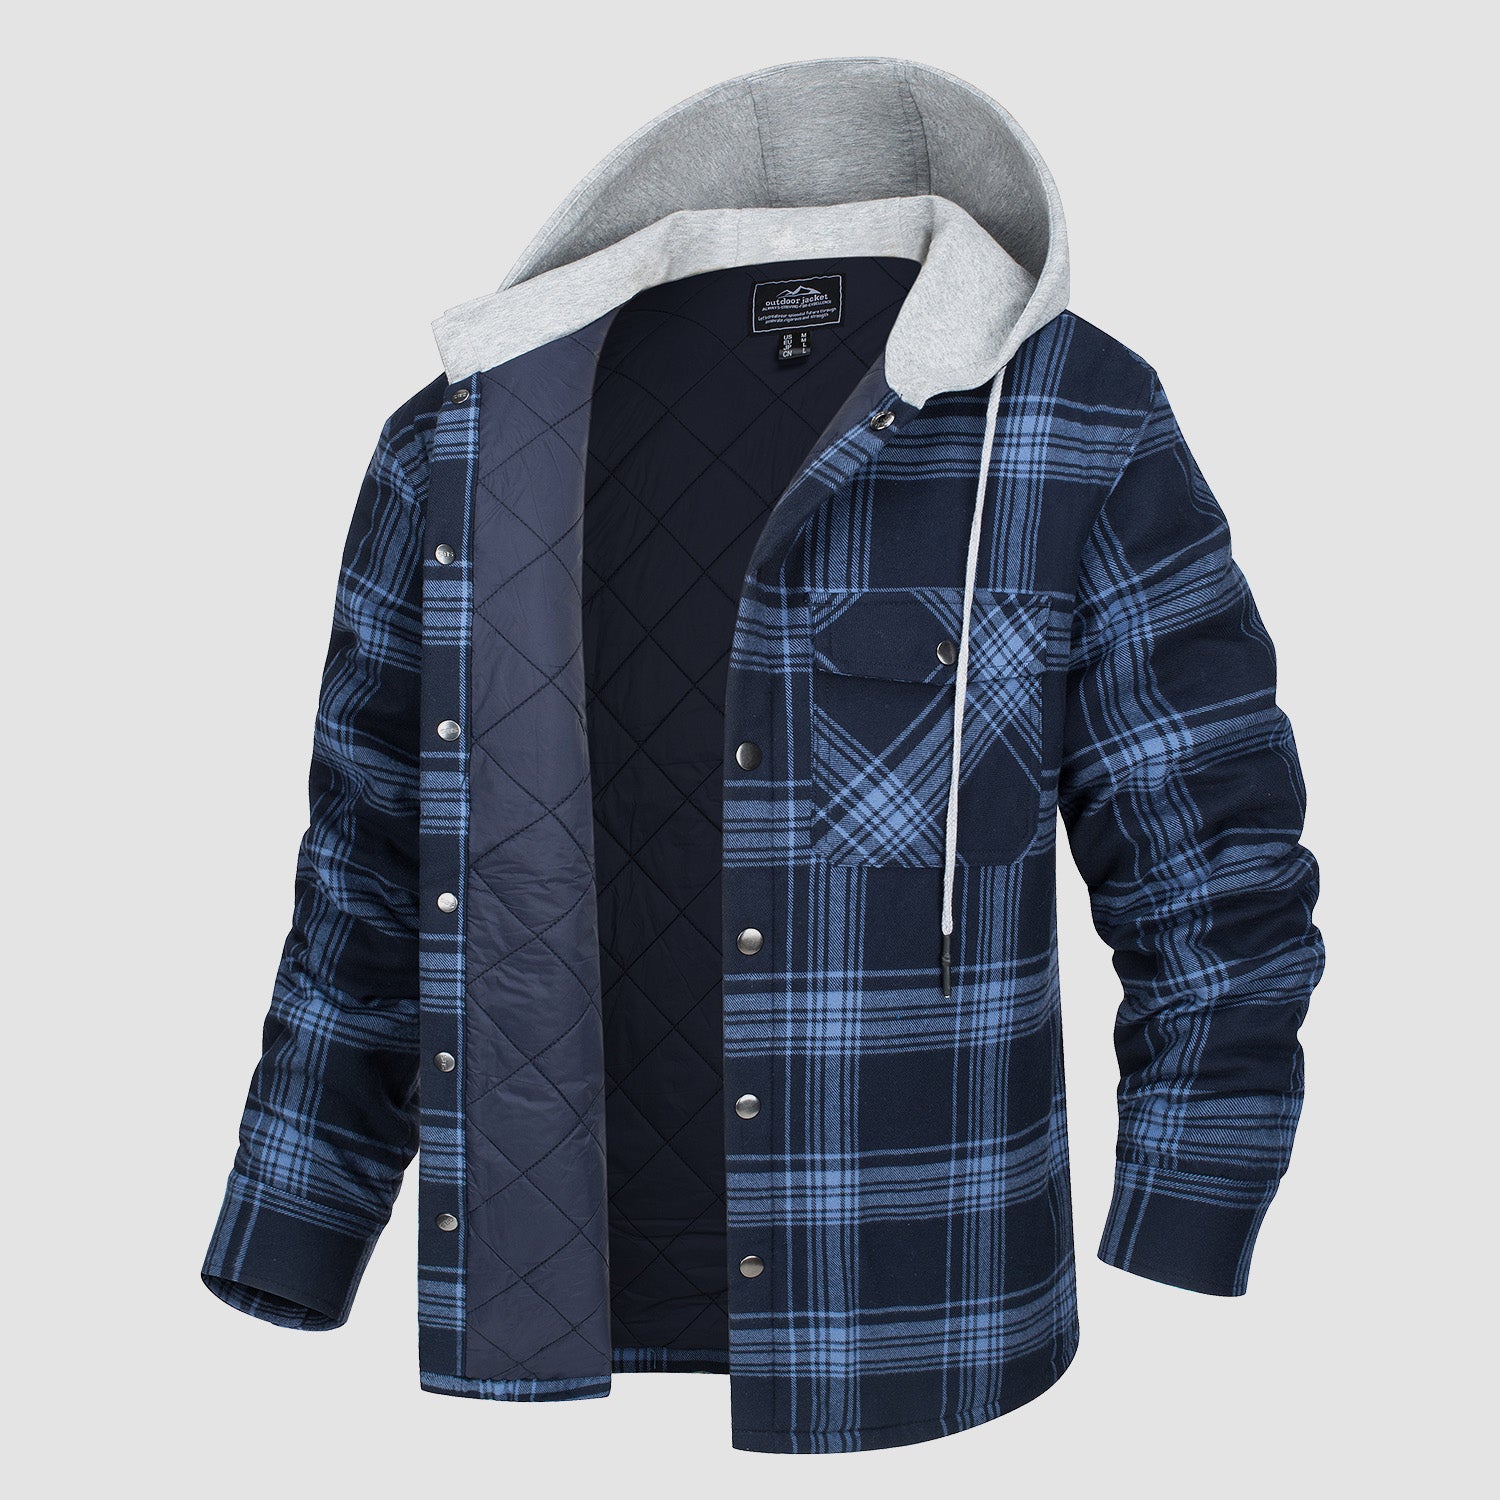 Men's Flannel Plaid Shirt Jacket with Hood Quilted Lined  Coat